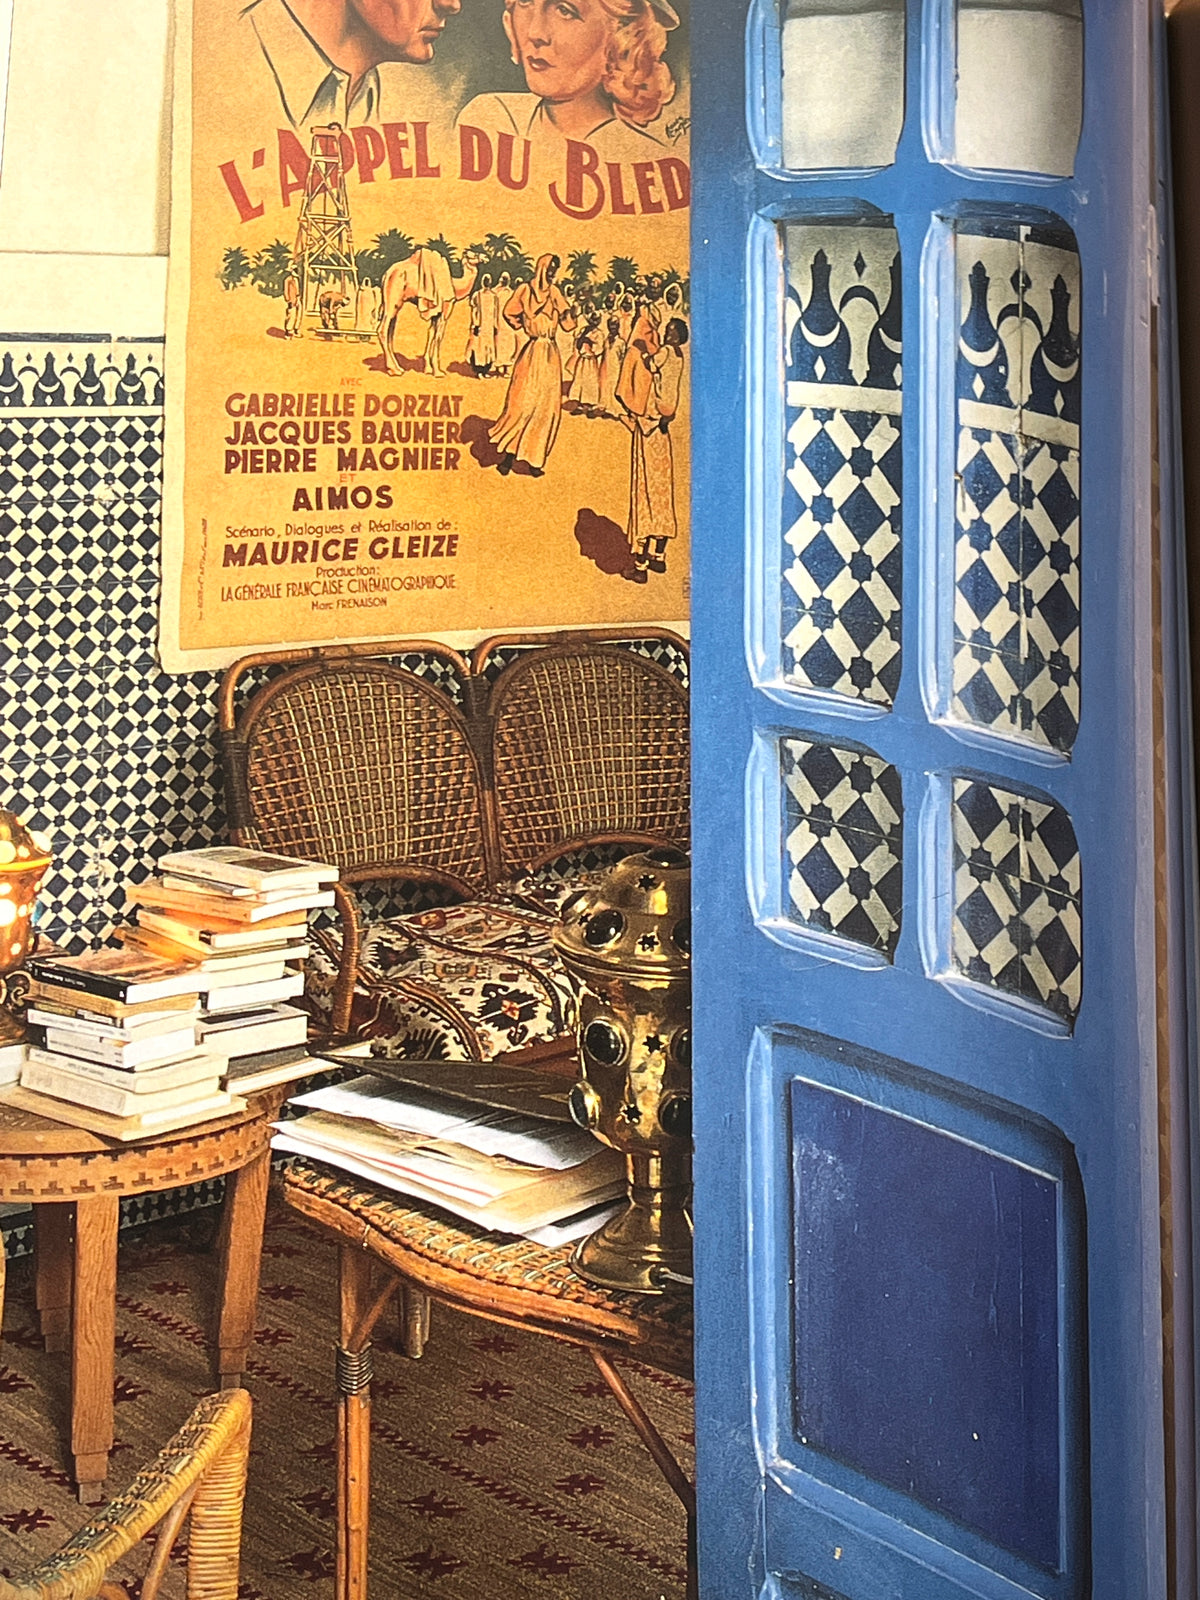 Moroccan Interiors, Lisa Lovatt-Smith, edited by Angelika Muthesius, Germany, Taschen, 1995, FINE, HC, 4to